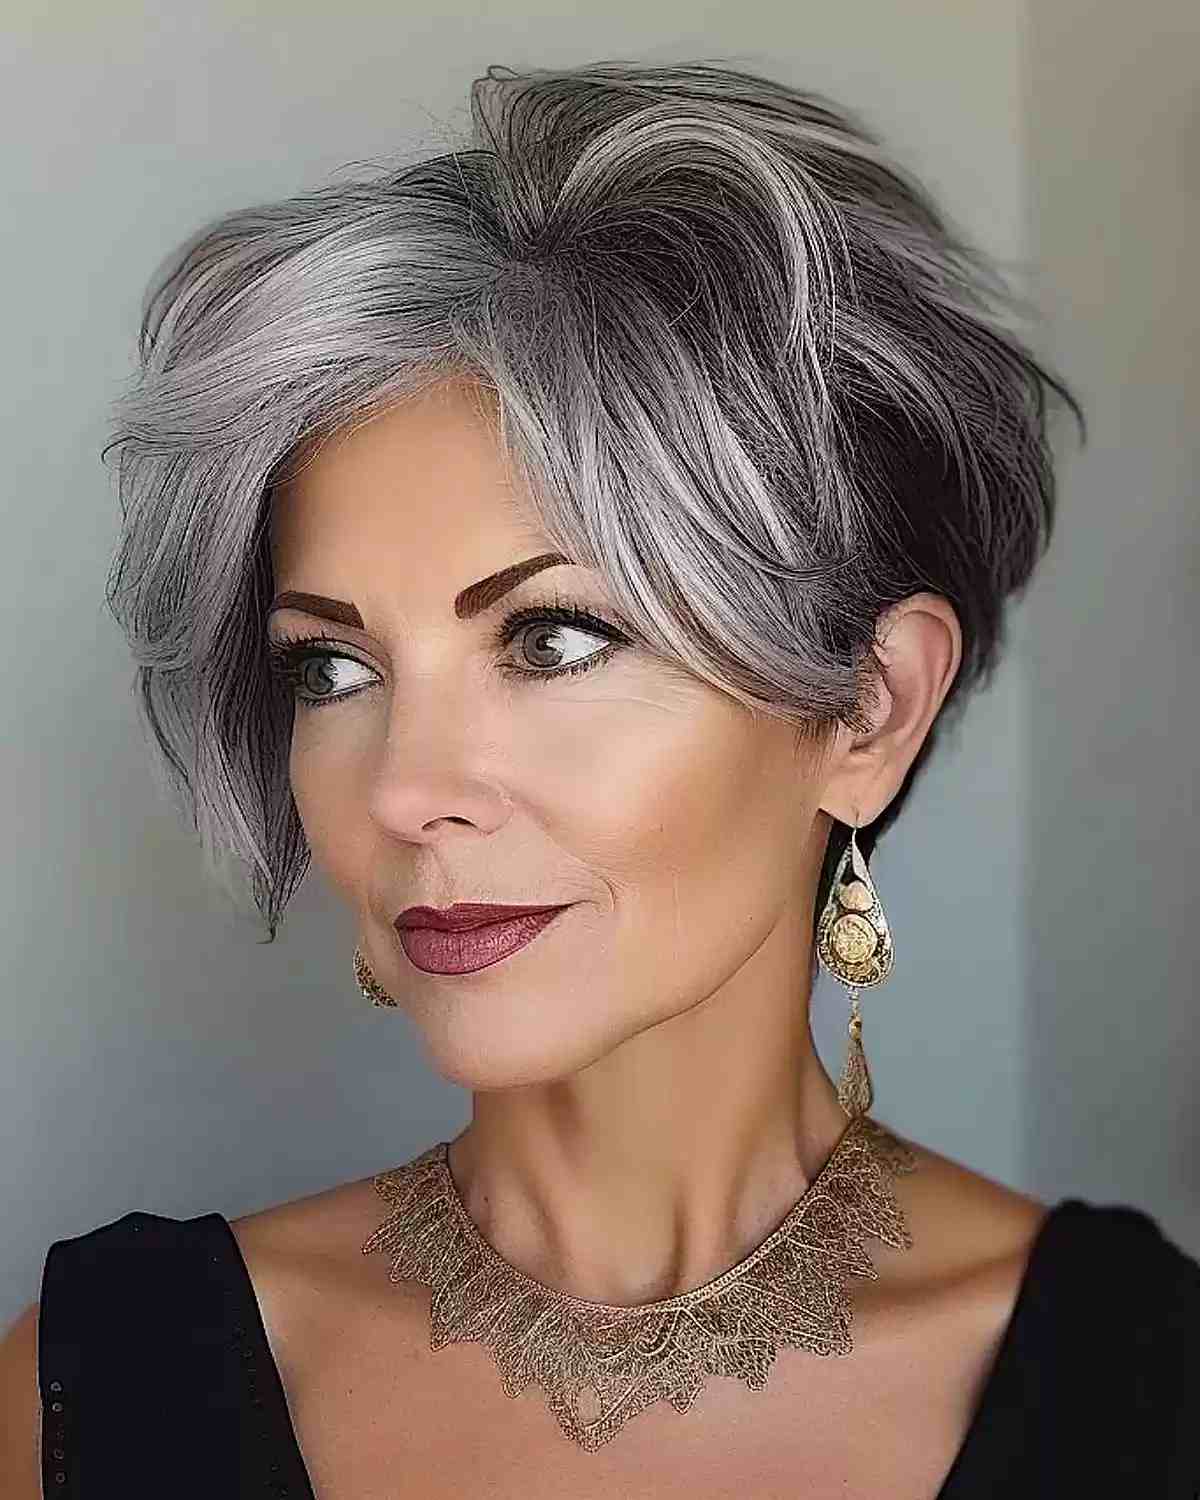 Long Bixie Cut with Grey Balayage for a Woman Aged 50